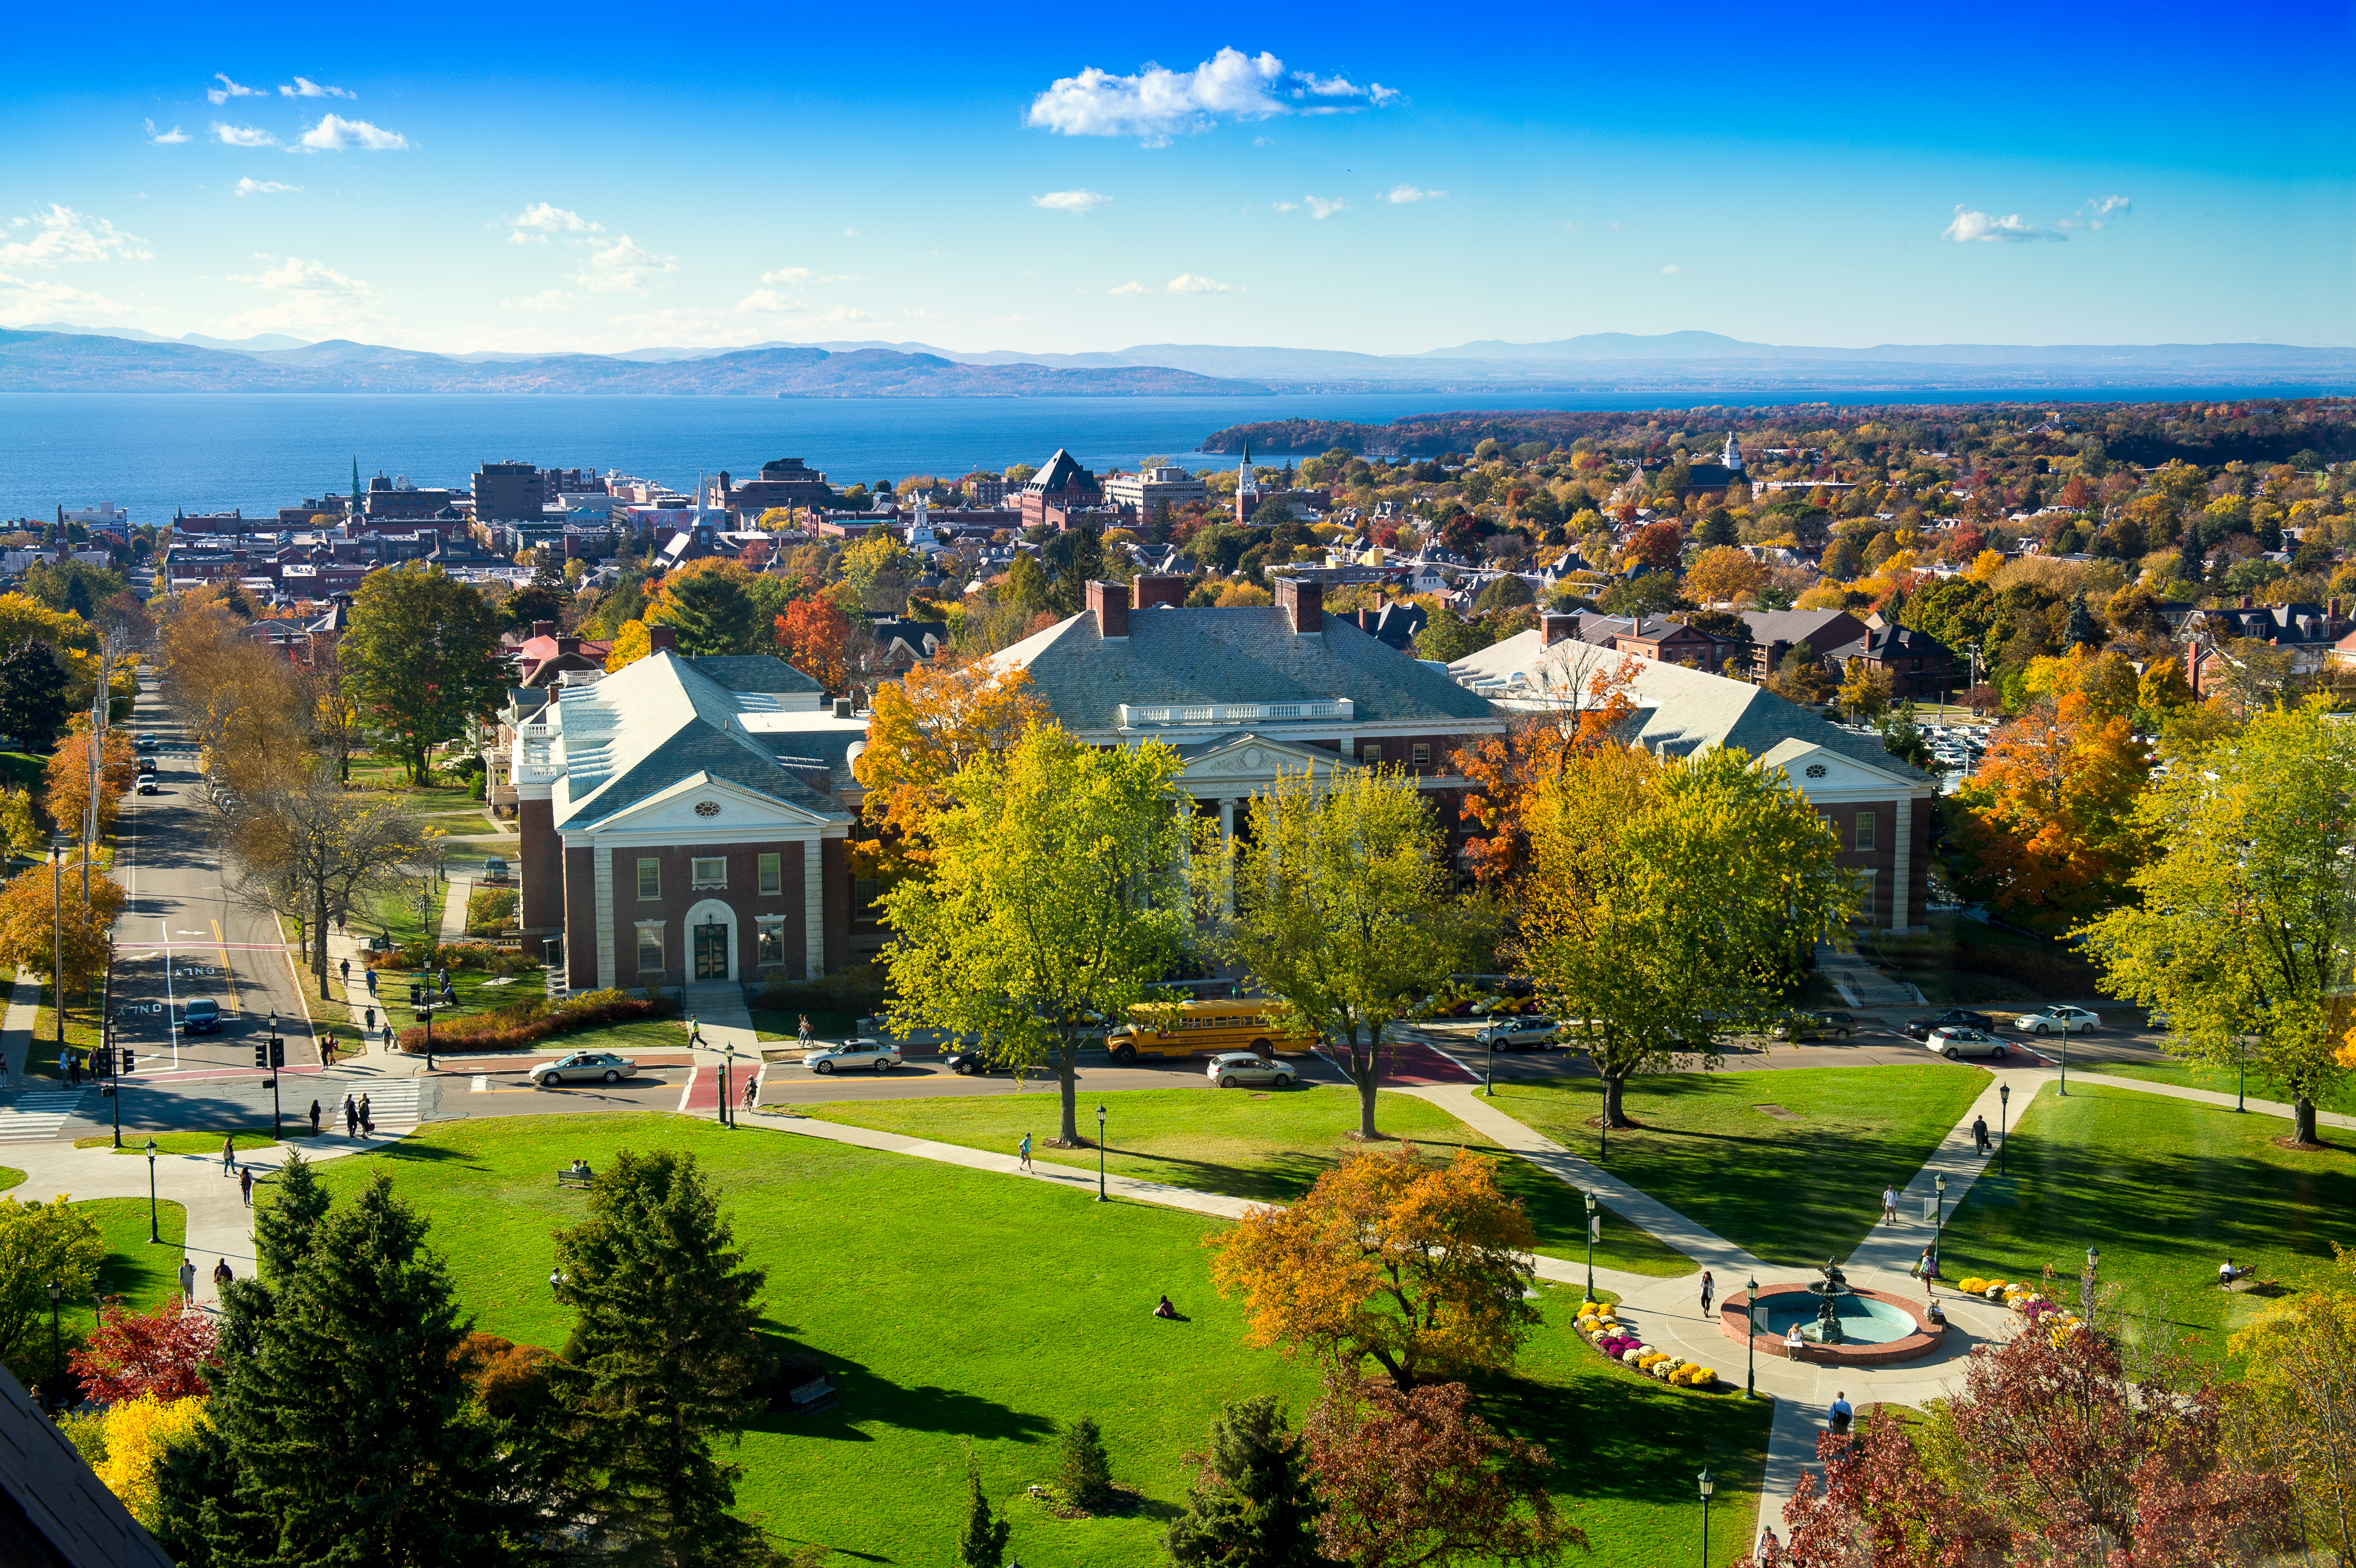 University of Vermont: Moving humankind forward through research and education